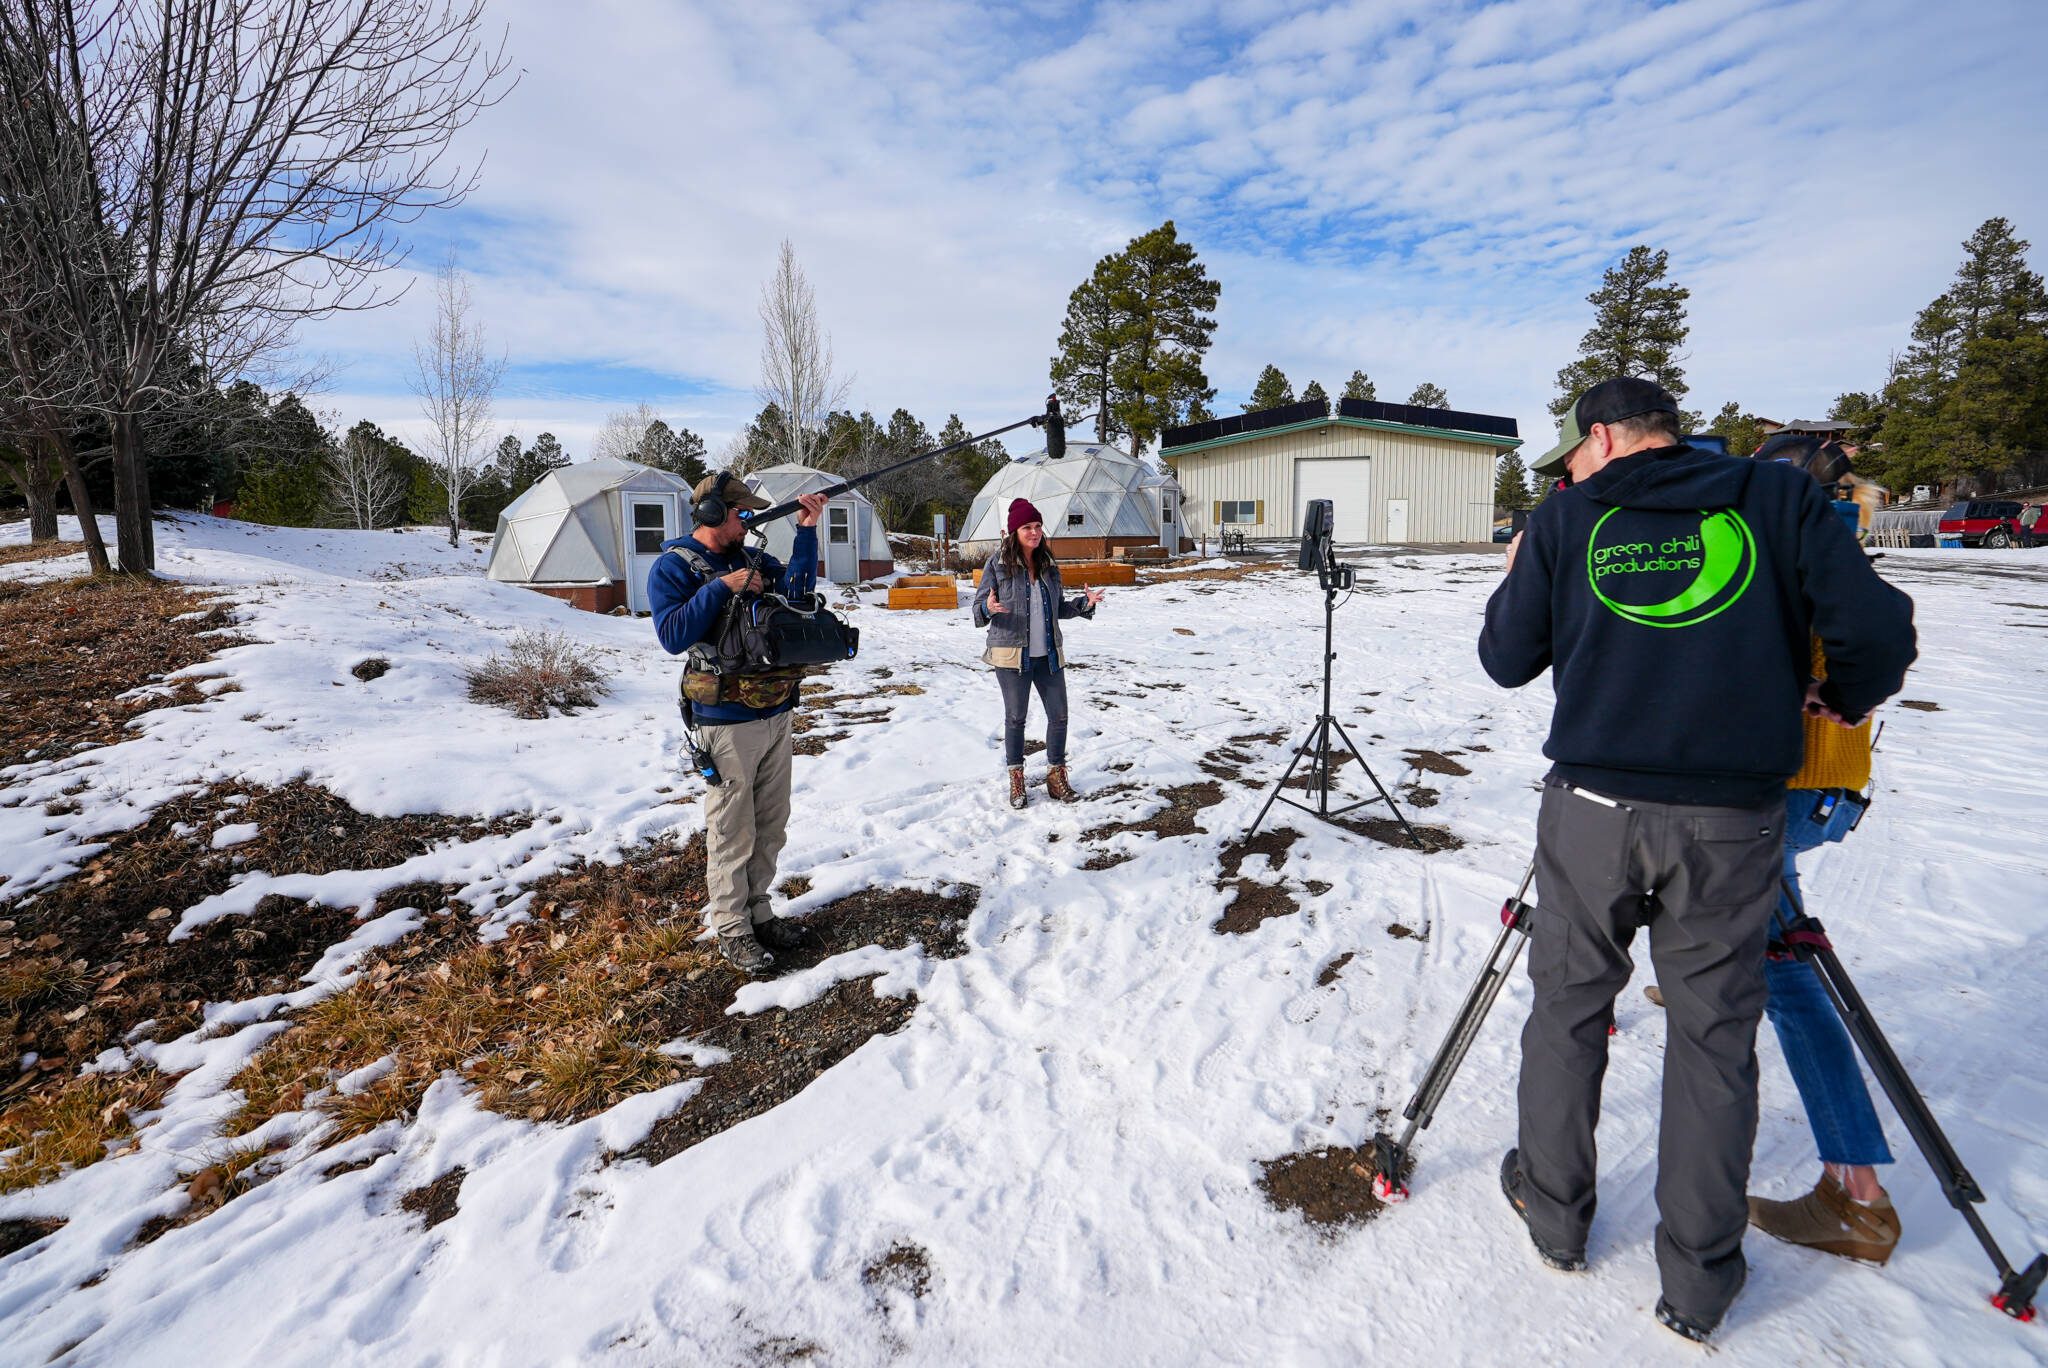 HGTV Building Roots filming at Growing Spaces in Pagosa Springs, CO